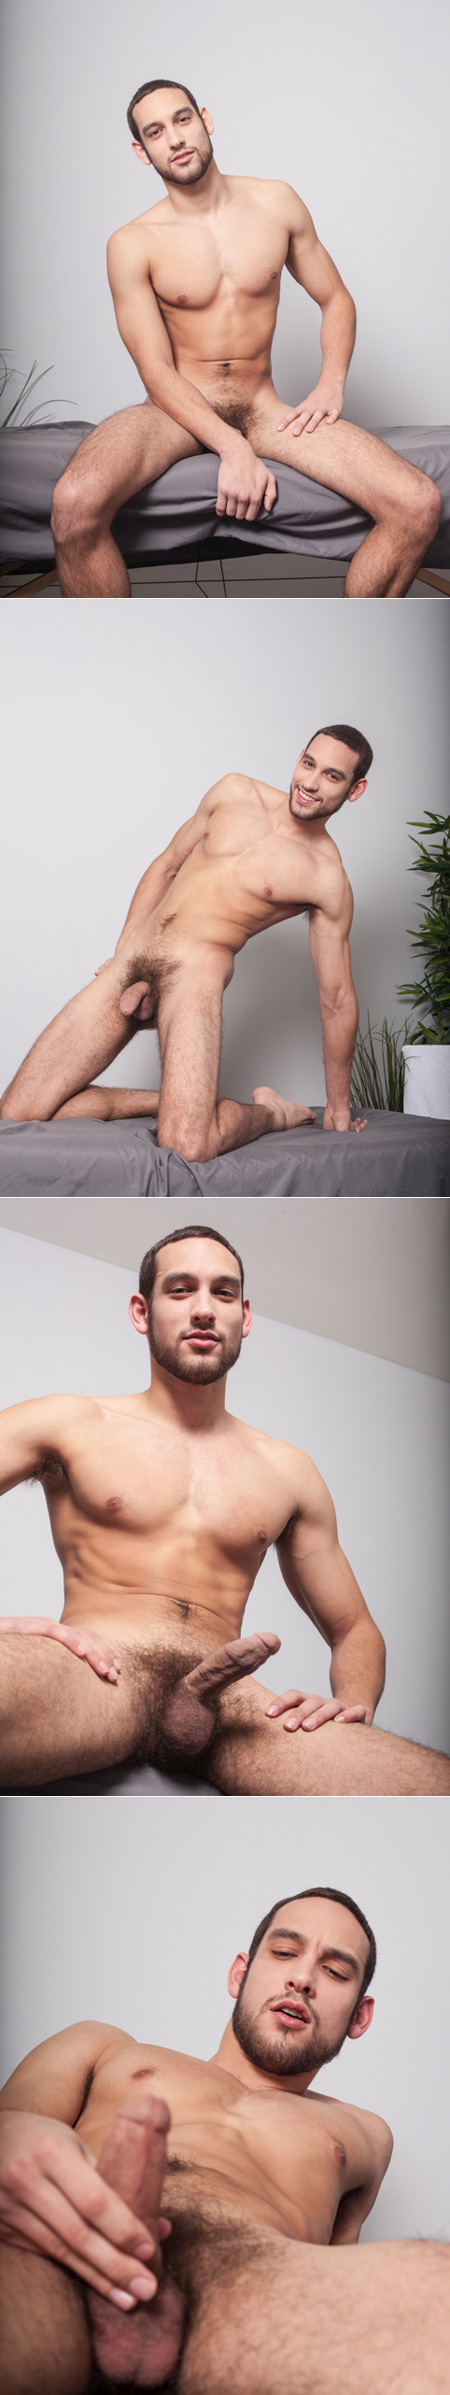 Nude straight guy with a beard and naturally smooth body gives himself an erection being an exhibitionist.